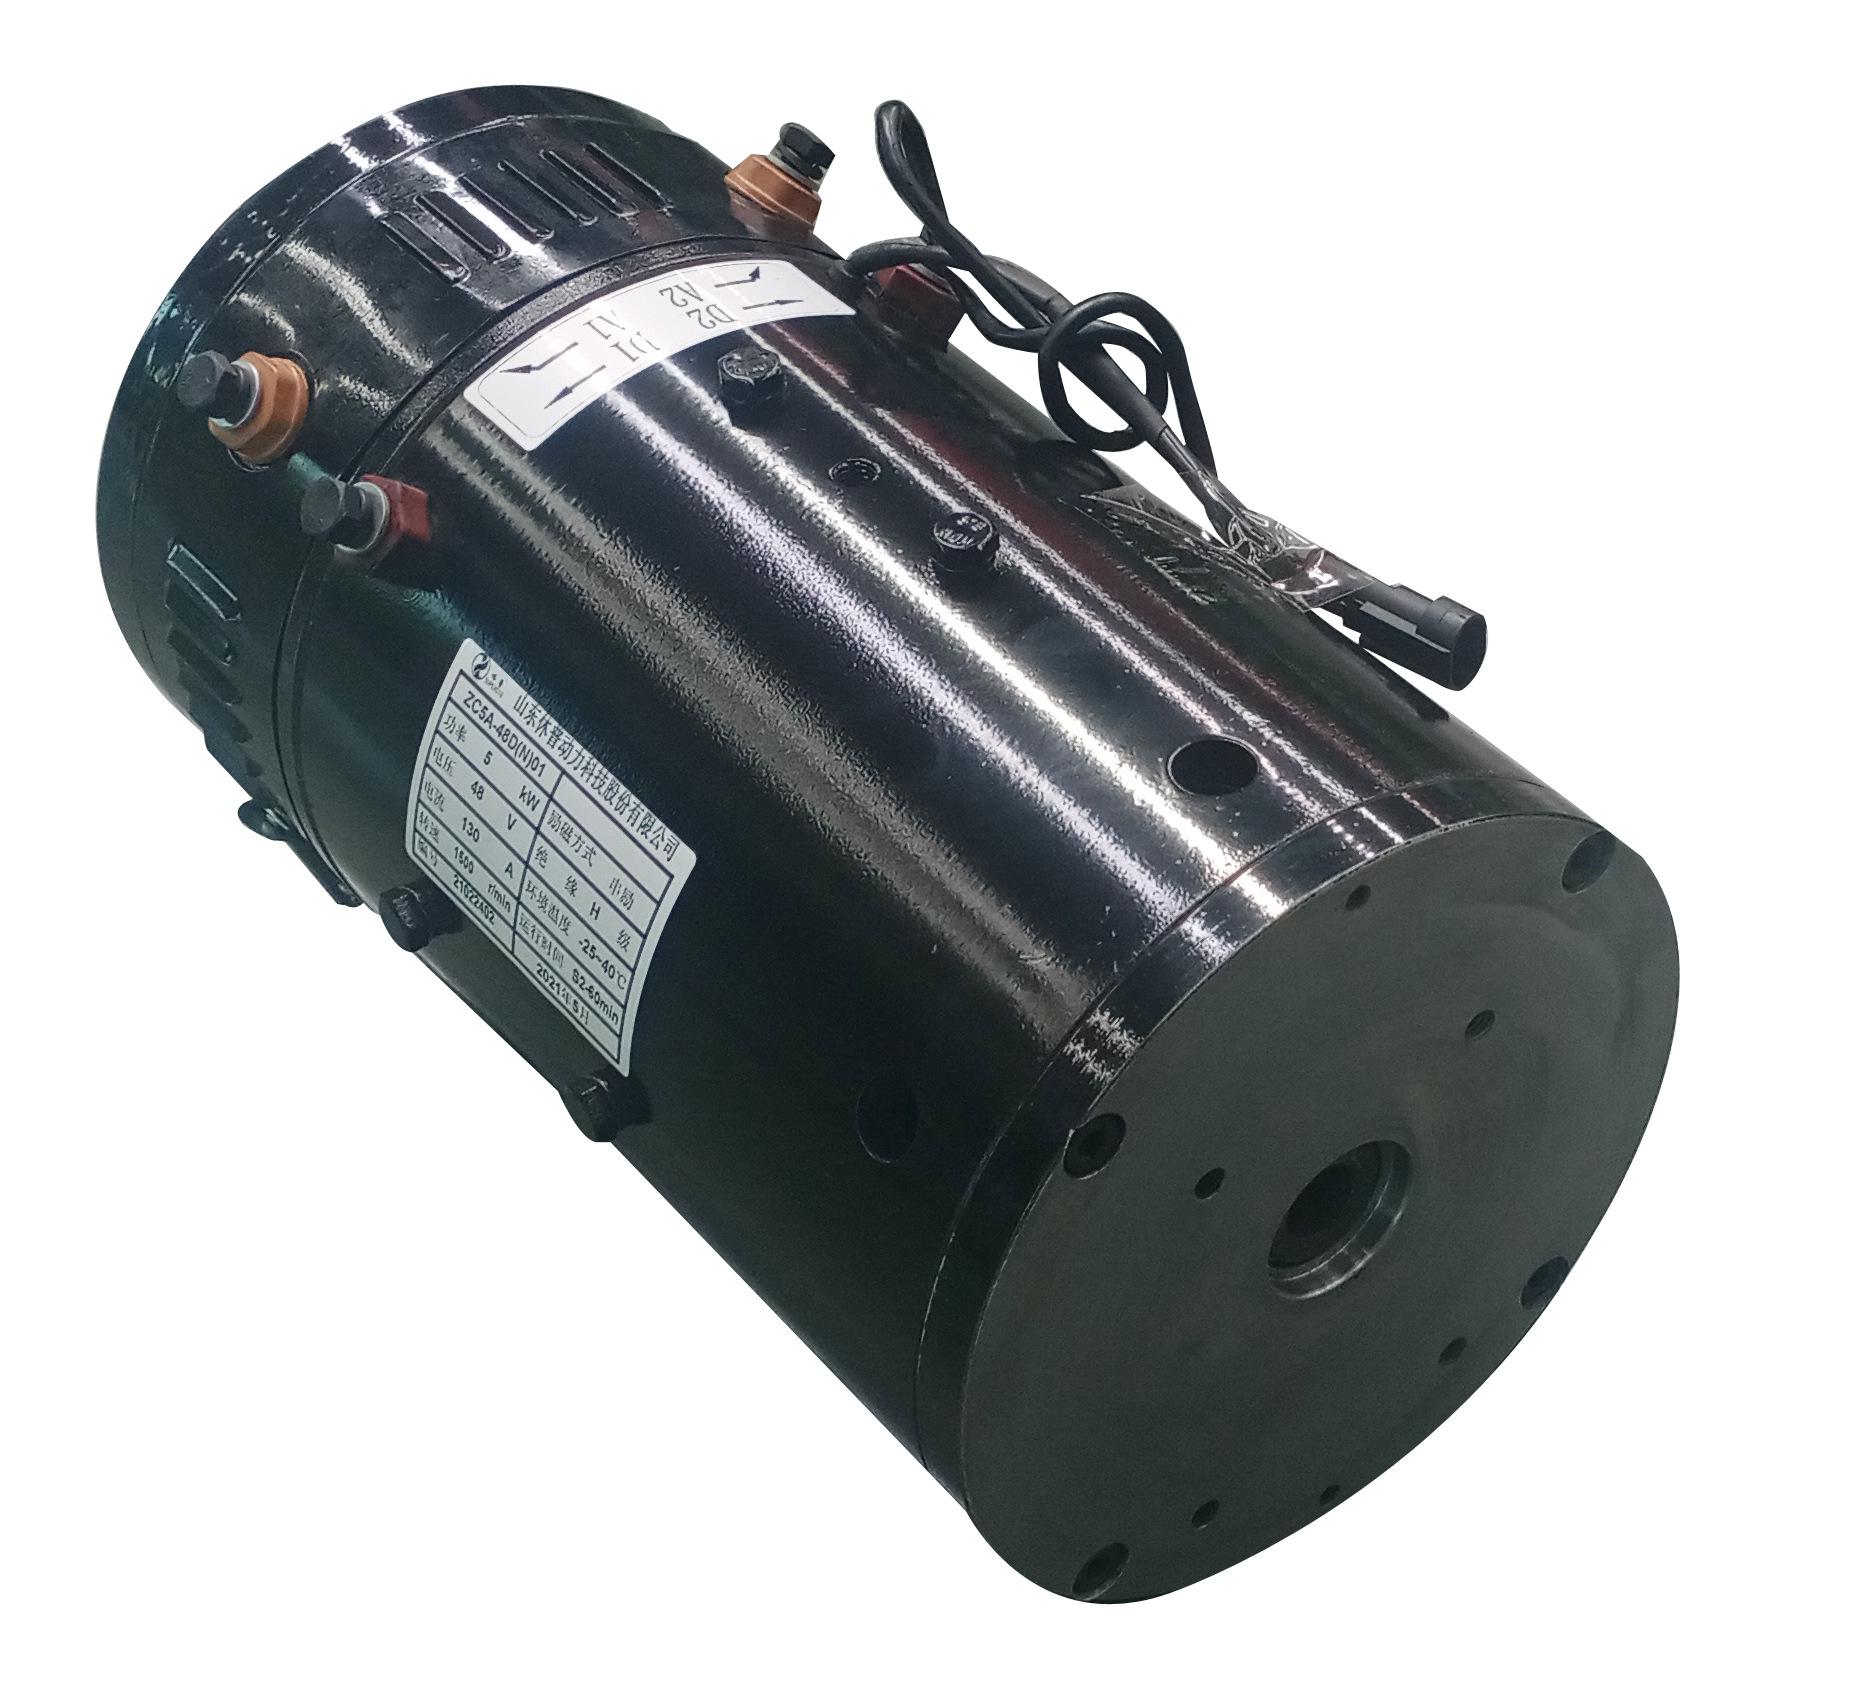 Oil Pump Motor DC Brush Hydraulic Mechanical Lifting Equipment Electric Motor Featured Image